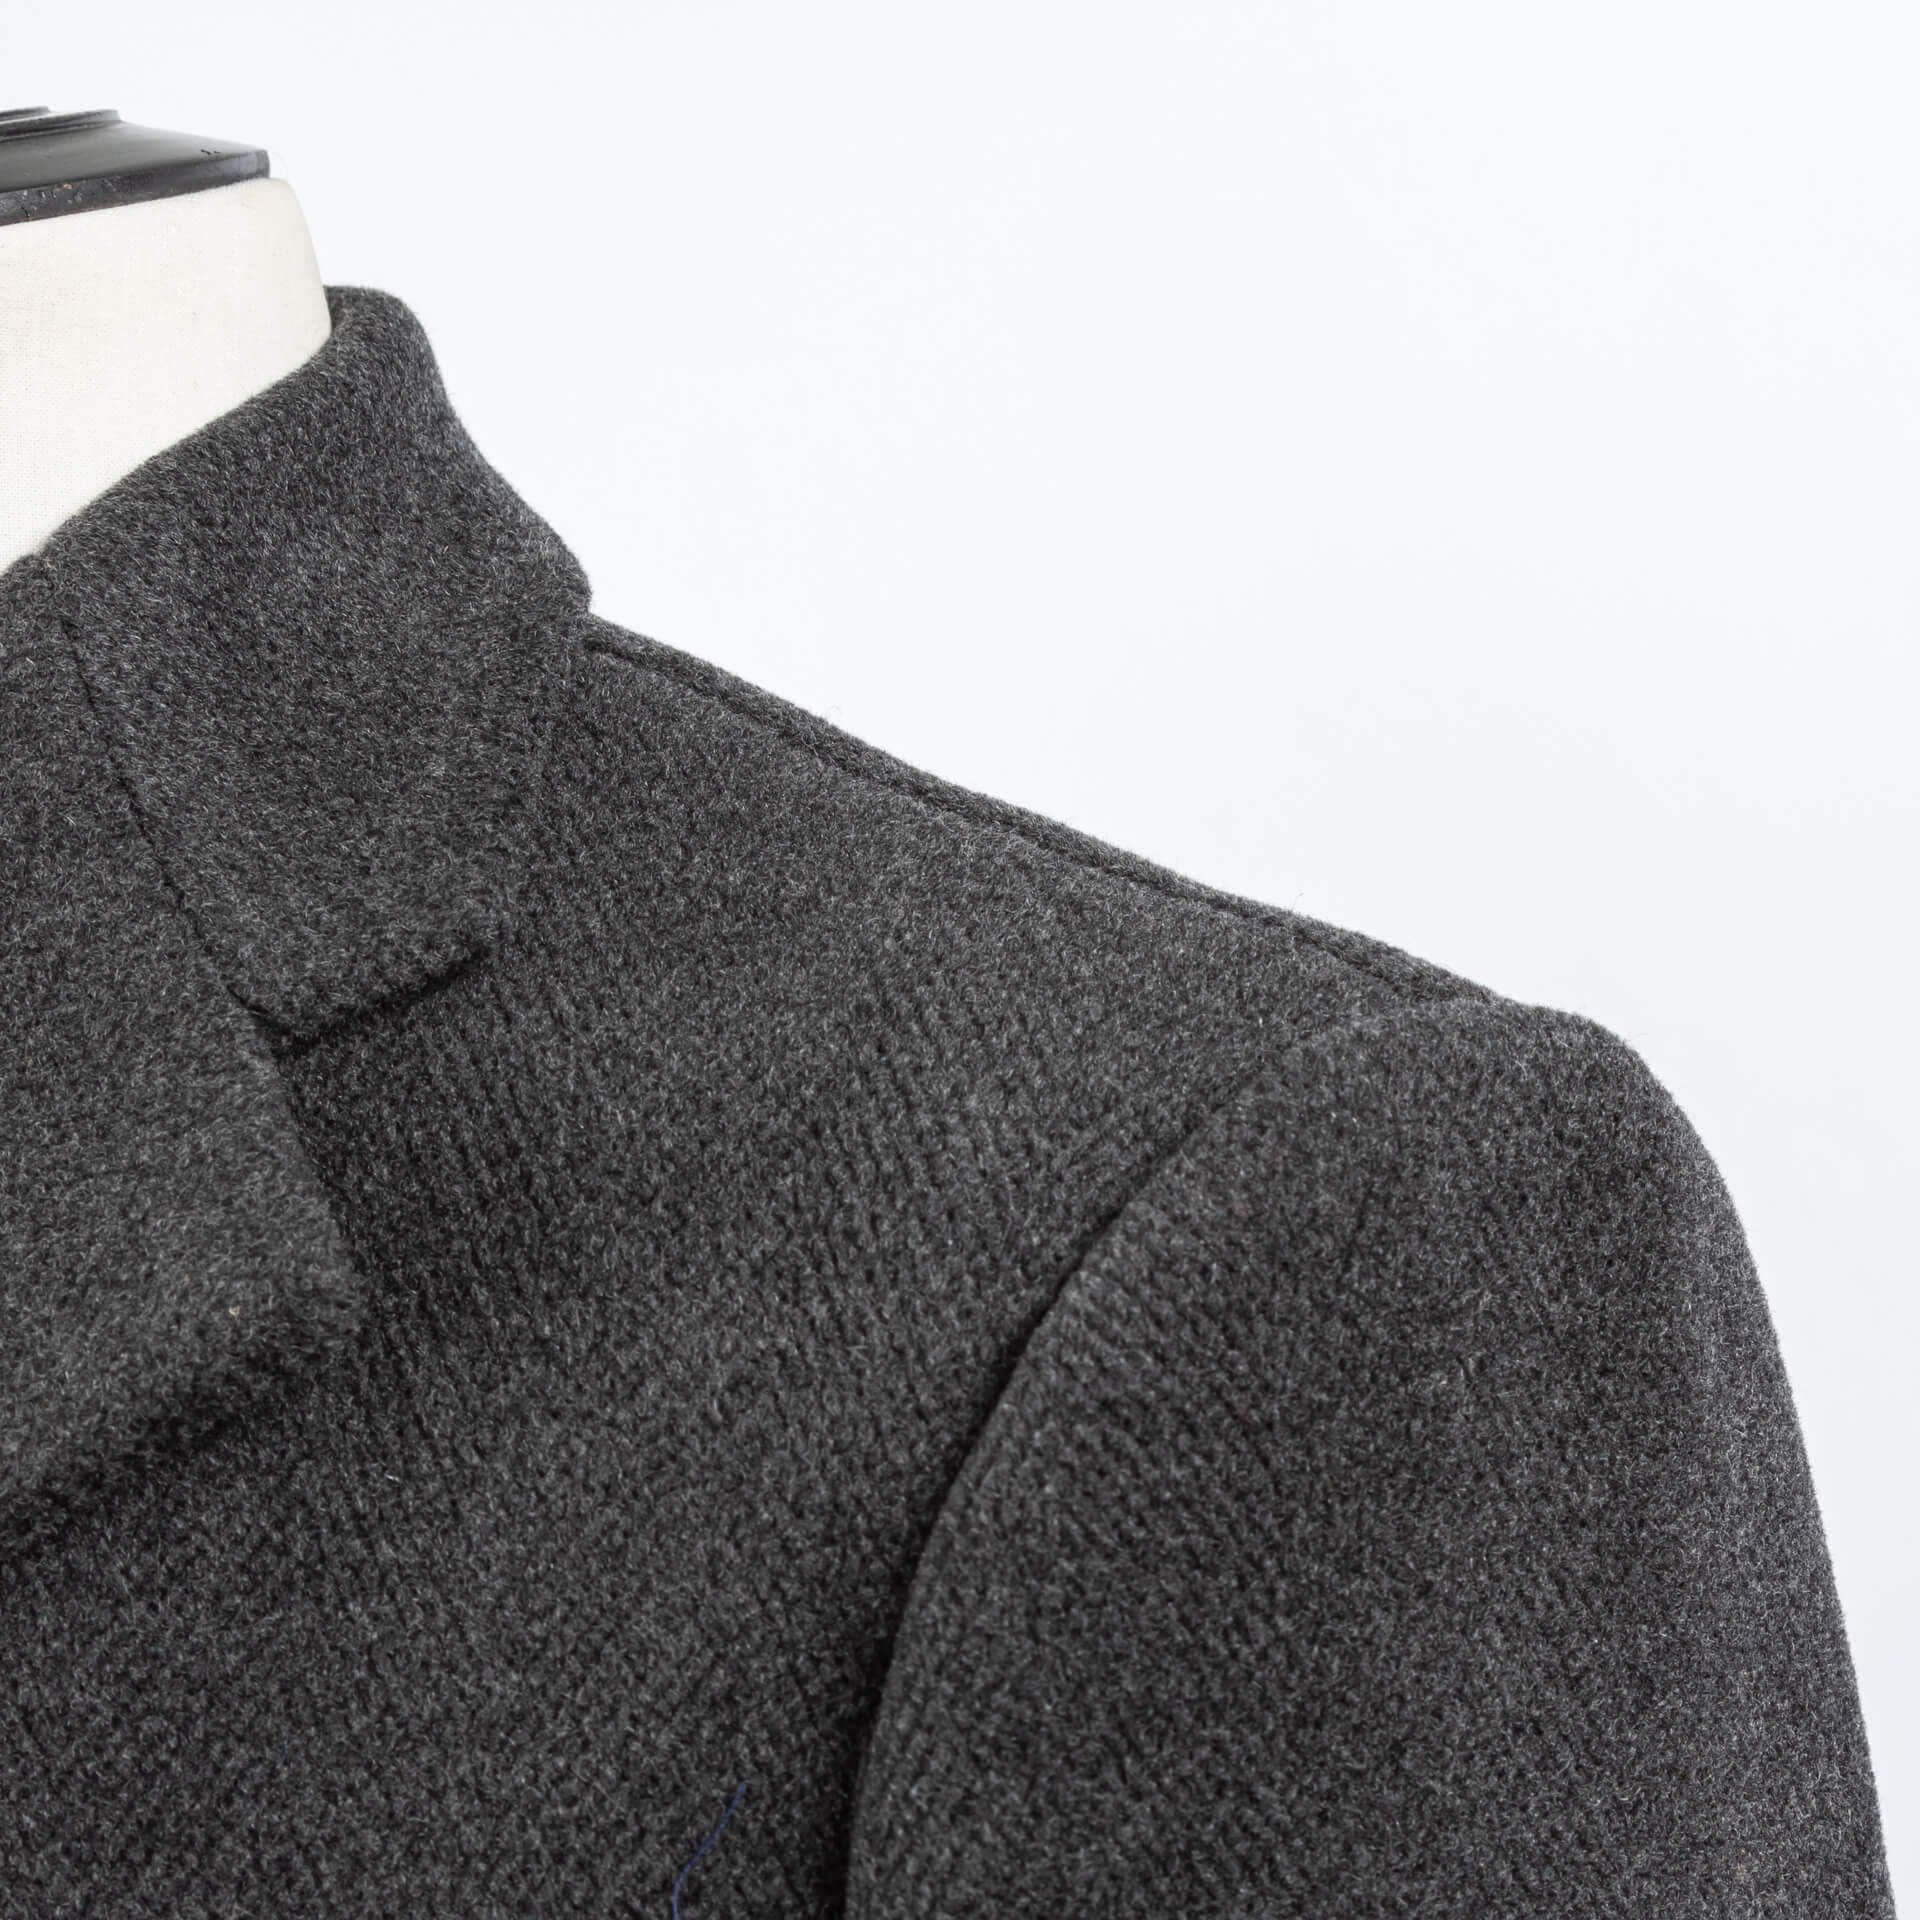 Classic Overcoat Lambswool — Bespoke Tailor for Custom Suits & Shirts.